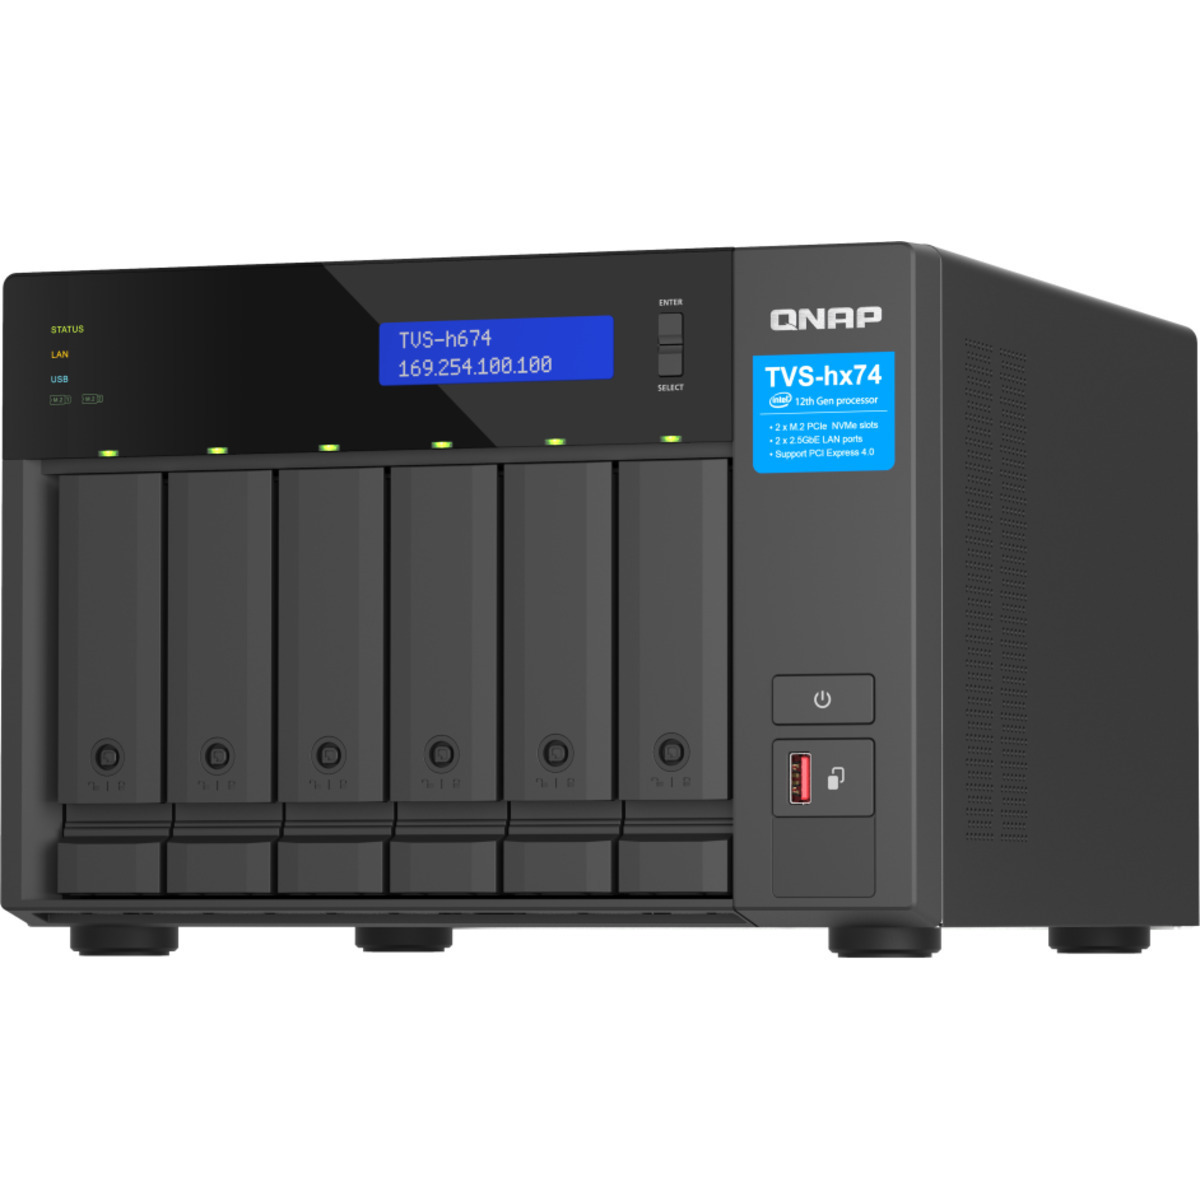 buy $5267 QNAP TVS-h674 Core i5 120tb Desktop NAS - Network Attached Storage Device 6x20000gb Western Digital Ultrastar DC HC560 WUH722020ALE6L4 3.5 7200rpm SATA 6Gb/s HDD ENTERPRISE Class Drives Installed - Burn-In Tested - nas headquarters buy network attached storage server device das new raid-5 free shipping simply usa TVS-h674 Core i5